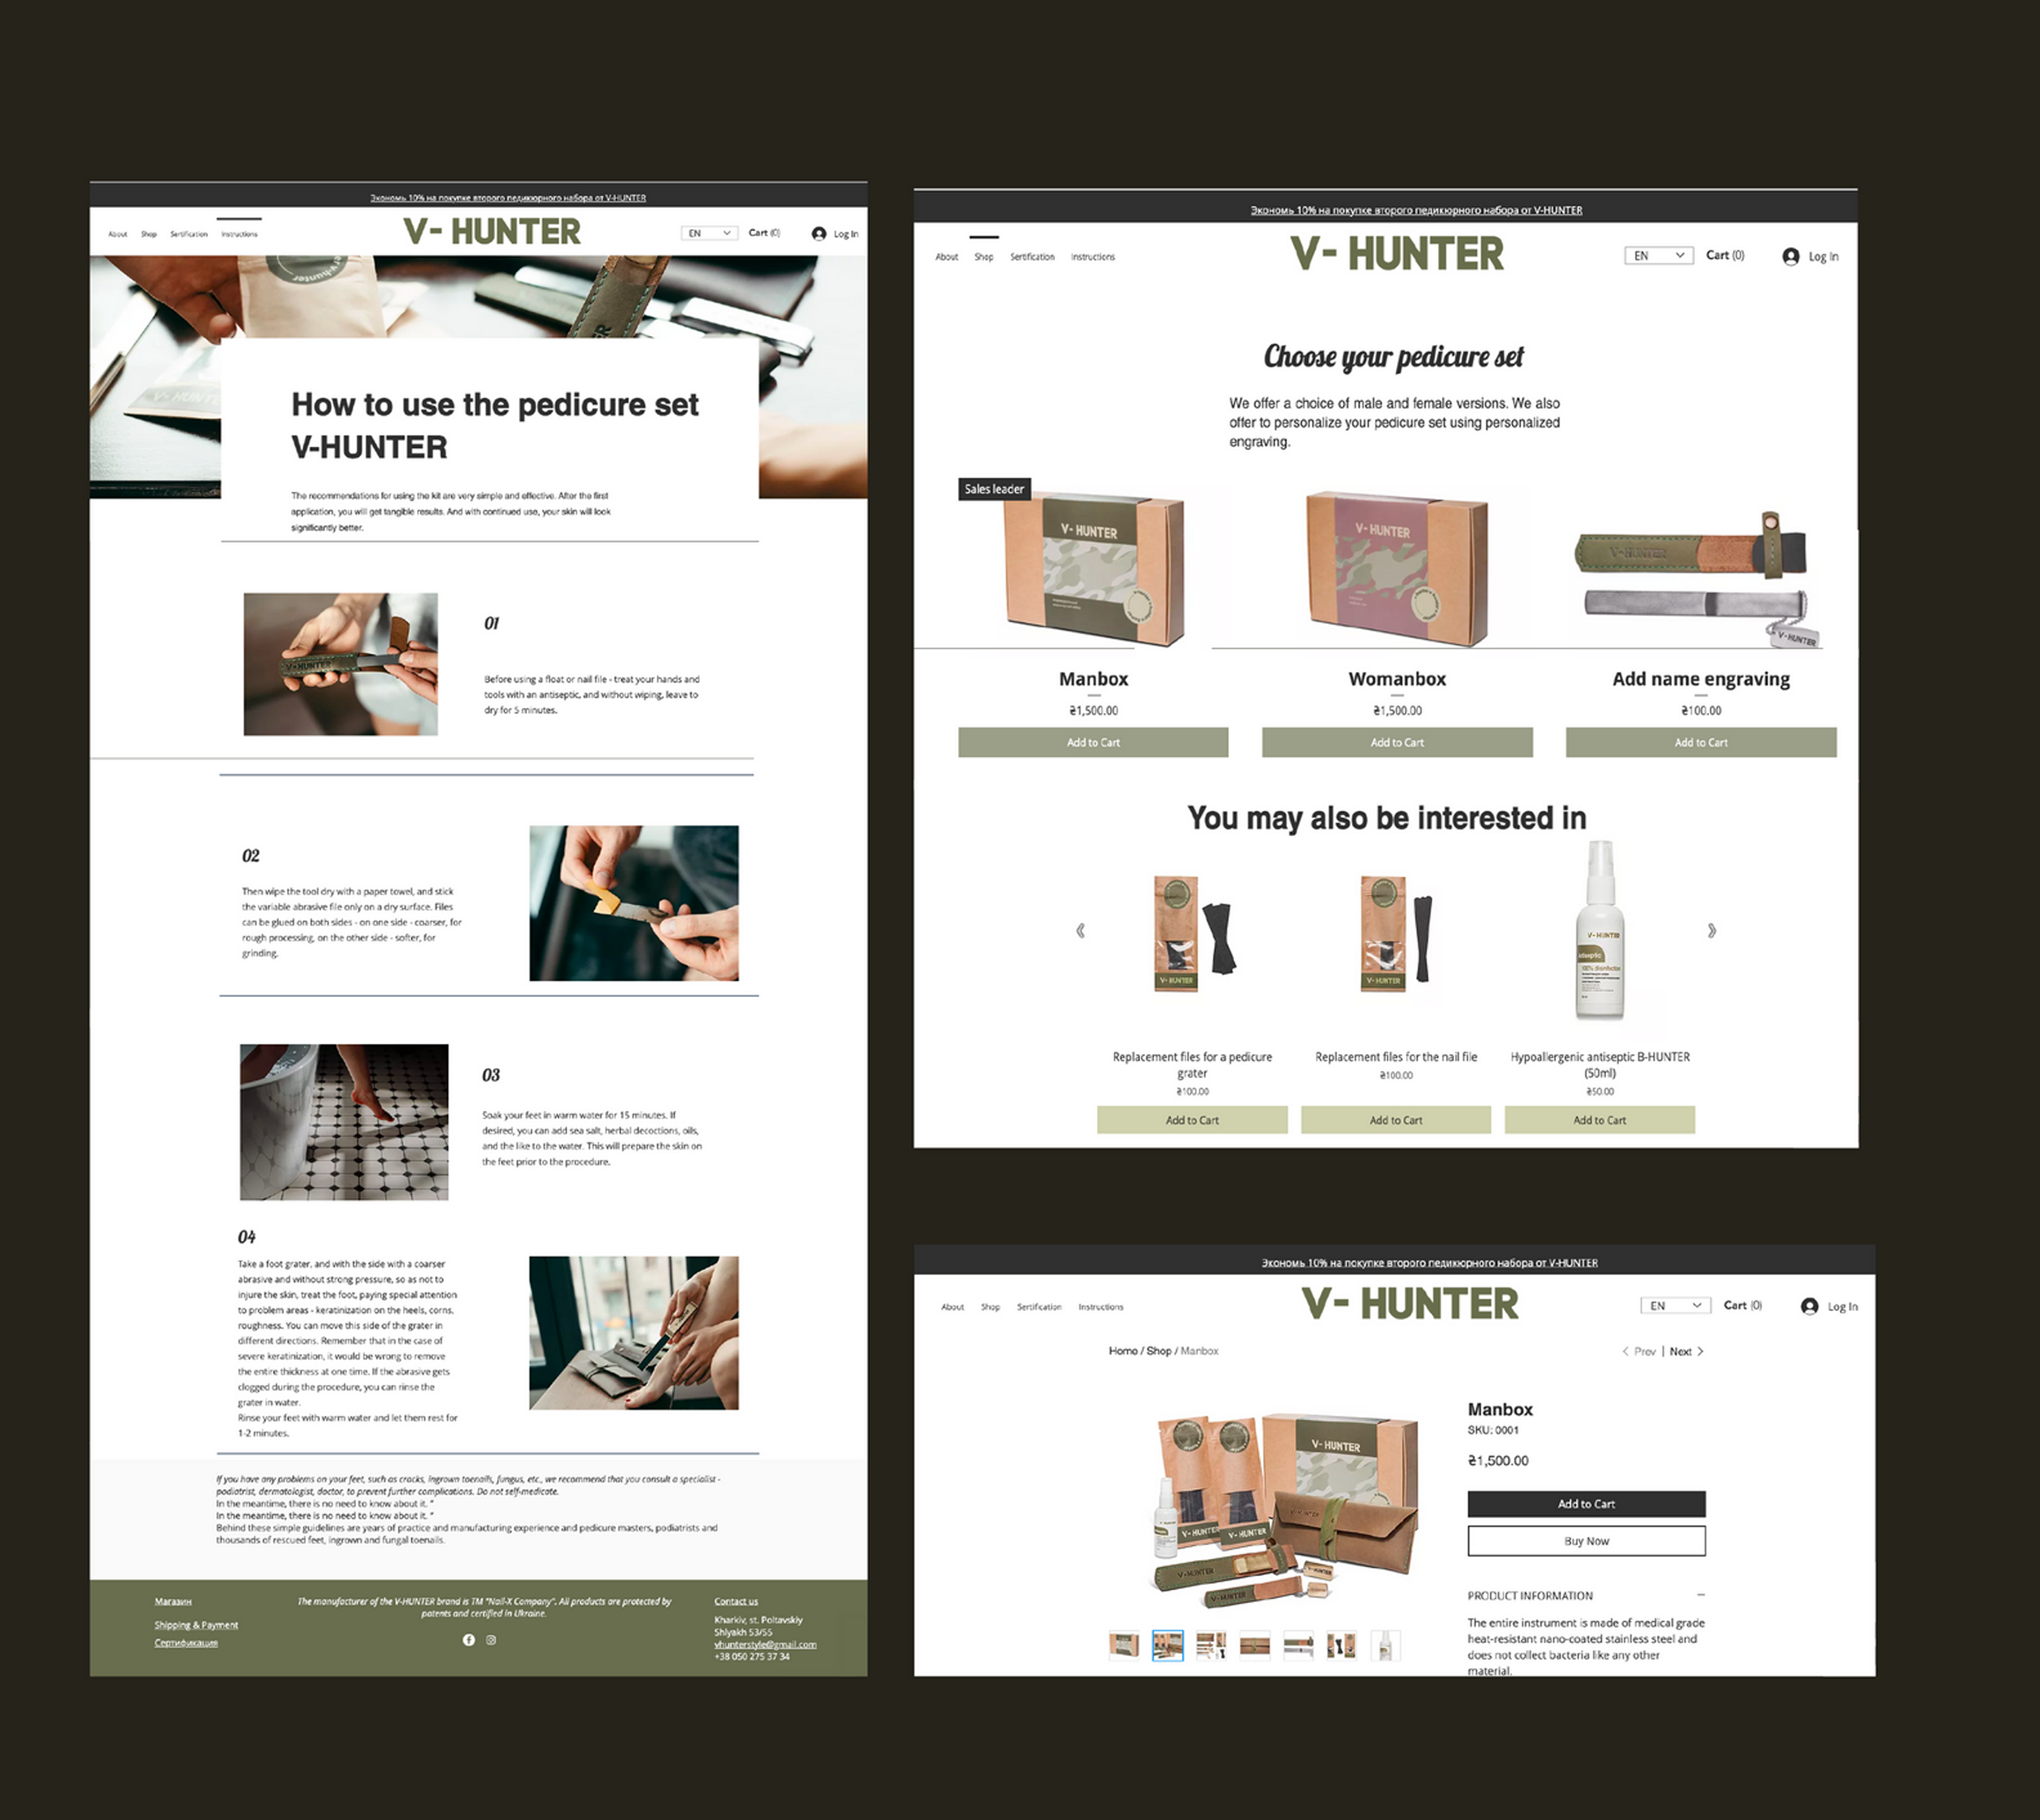 V-Hunter online store homepage with products displayed on a background of khaki-colored patterns and leather texture.